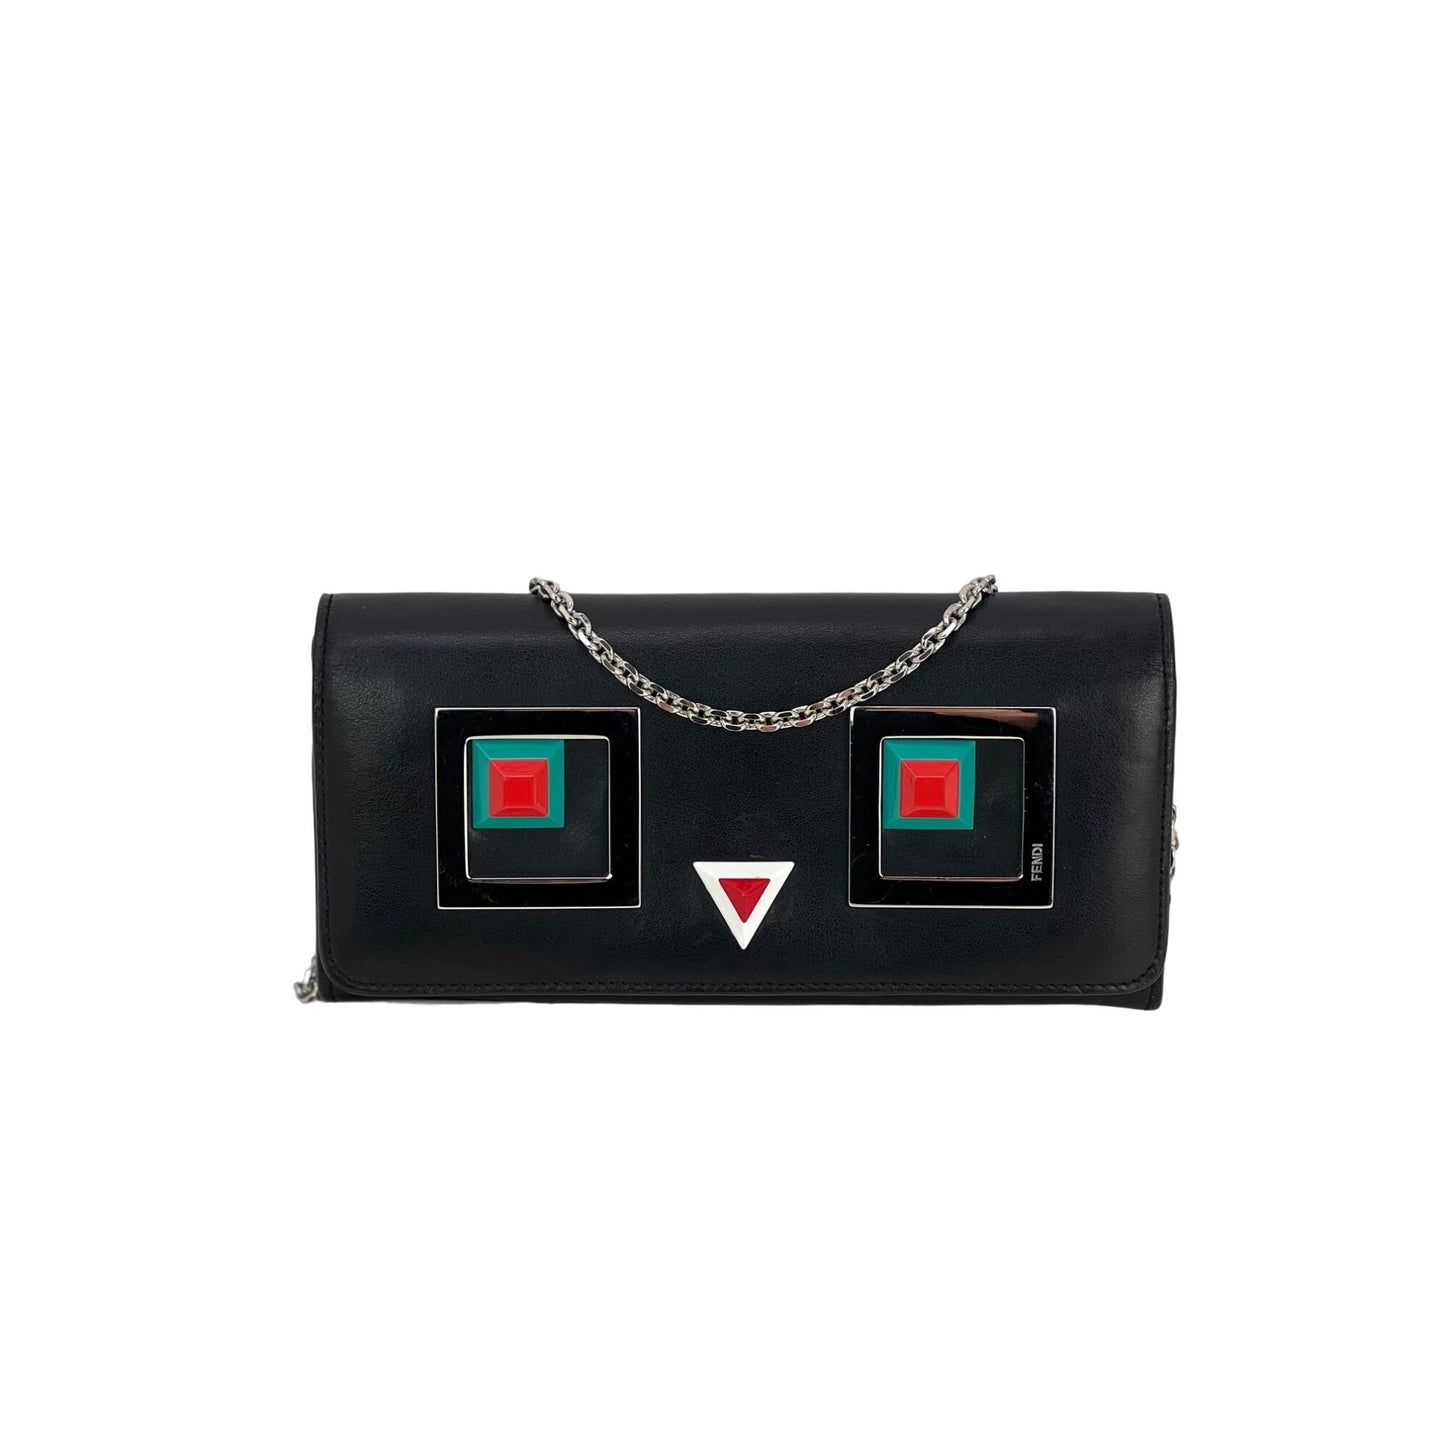 Fendi Wallet on Chain Review + Ways to Wear